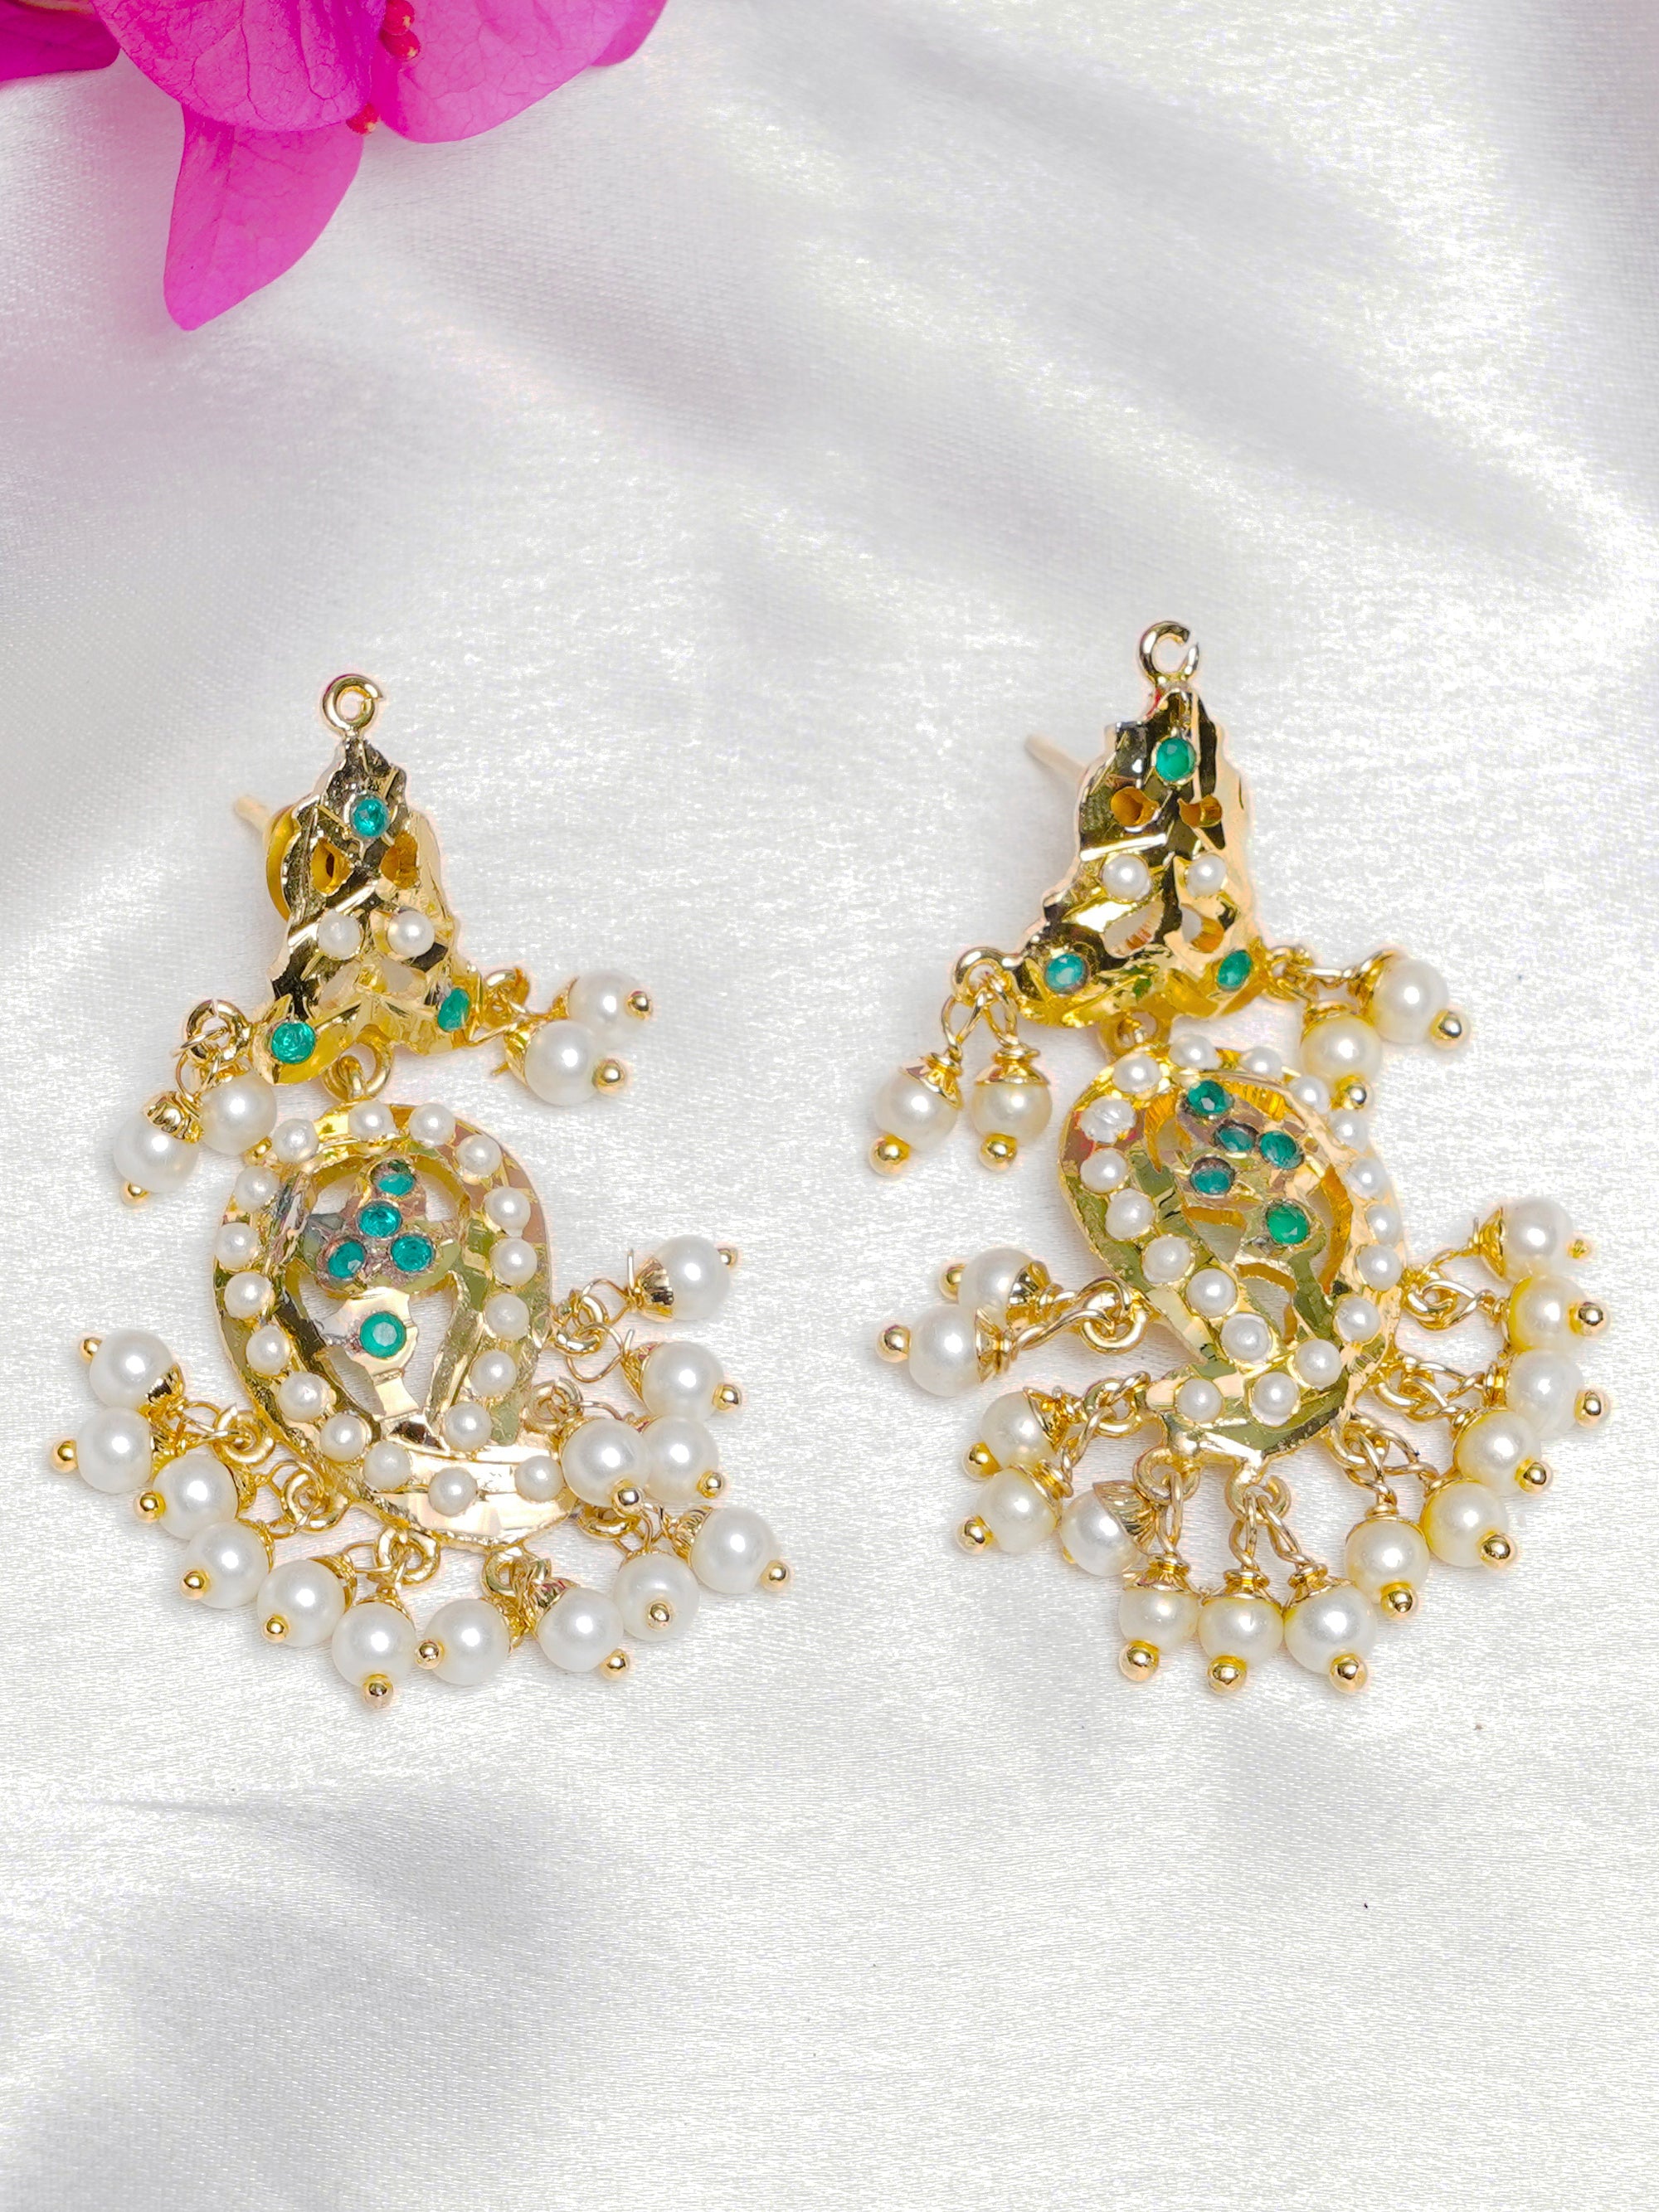 Kairi Jadau Small Chaandbali Earrings (Gold plated with Emerald Green Stones and White Pearls) - QUEENS JEWELS